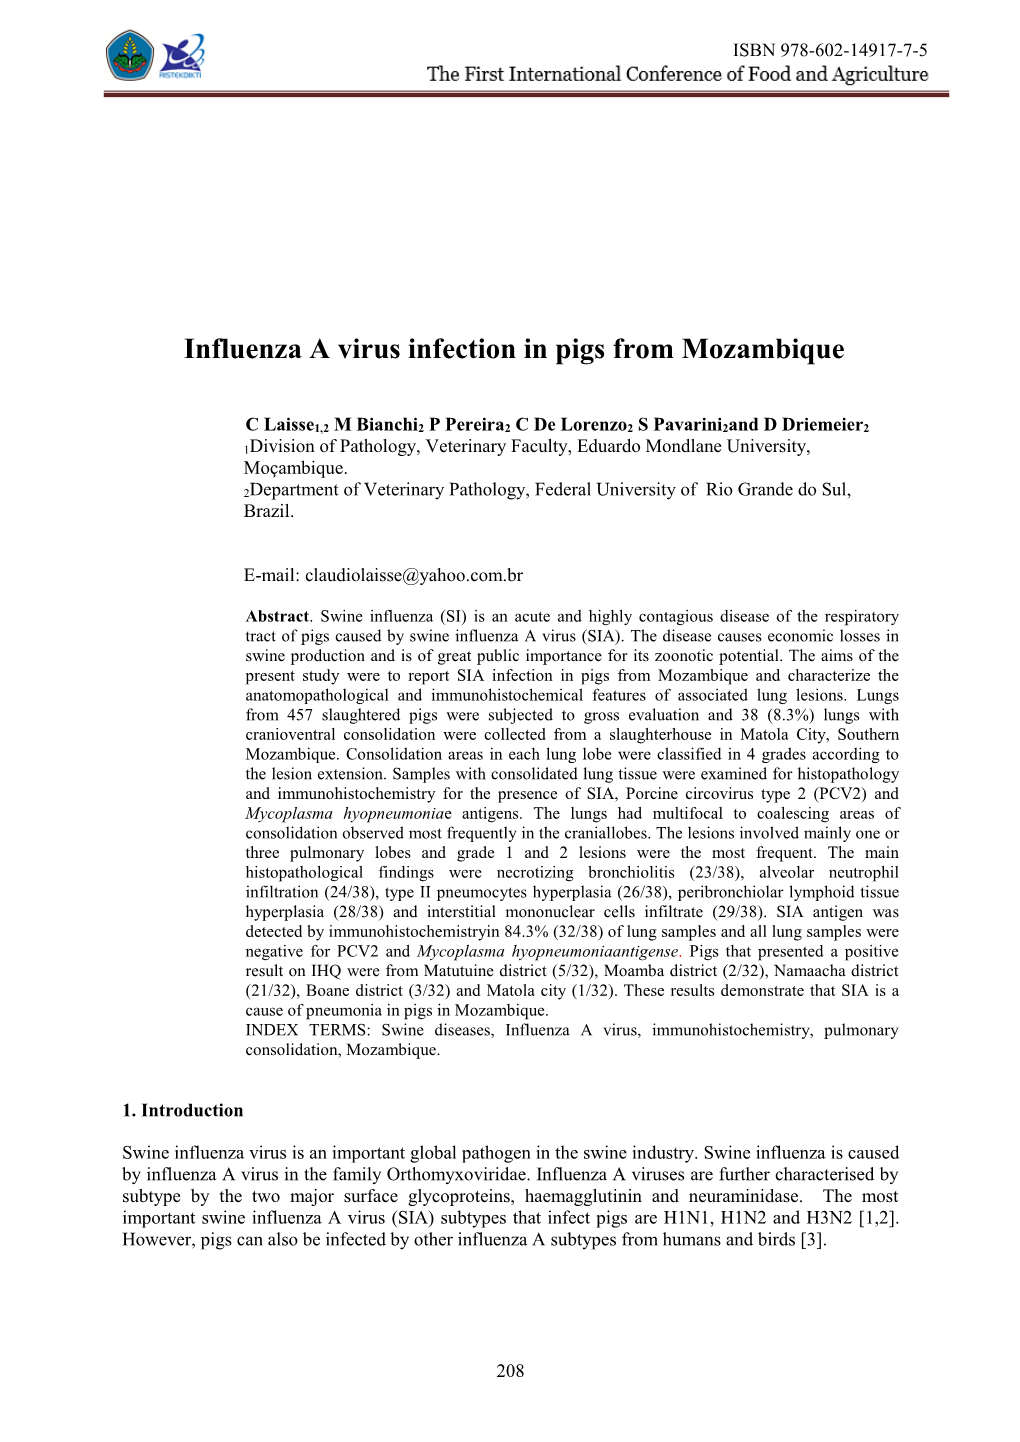 Influenza a Virus Infection in Pigs from Mozambique